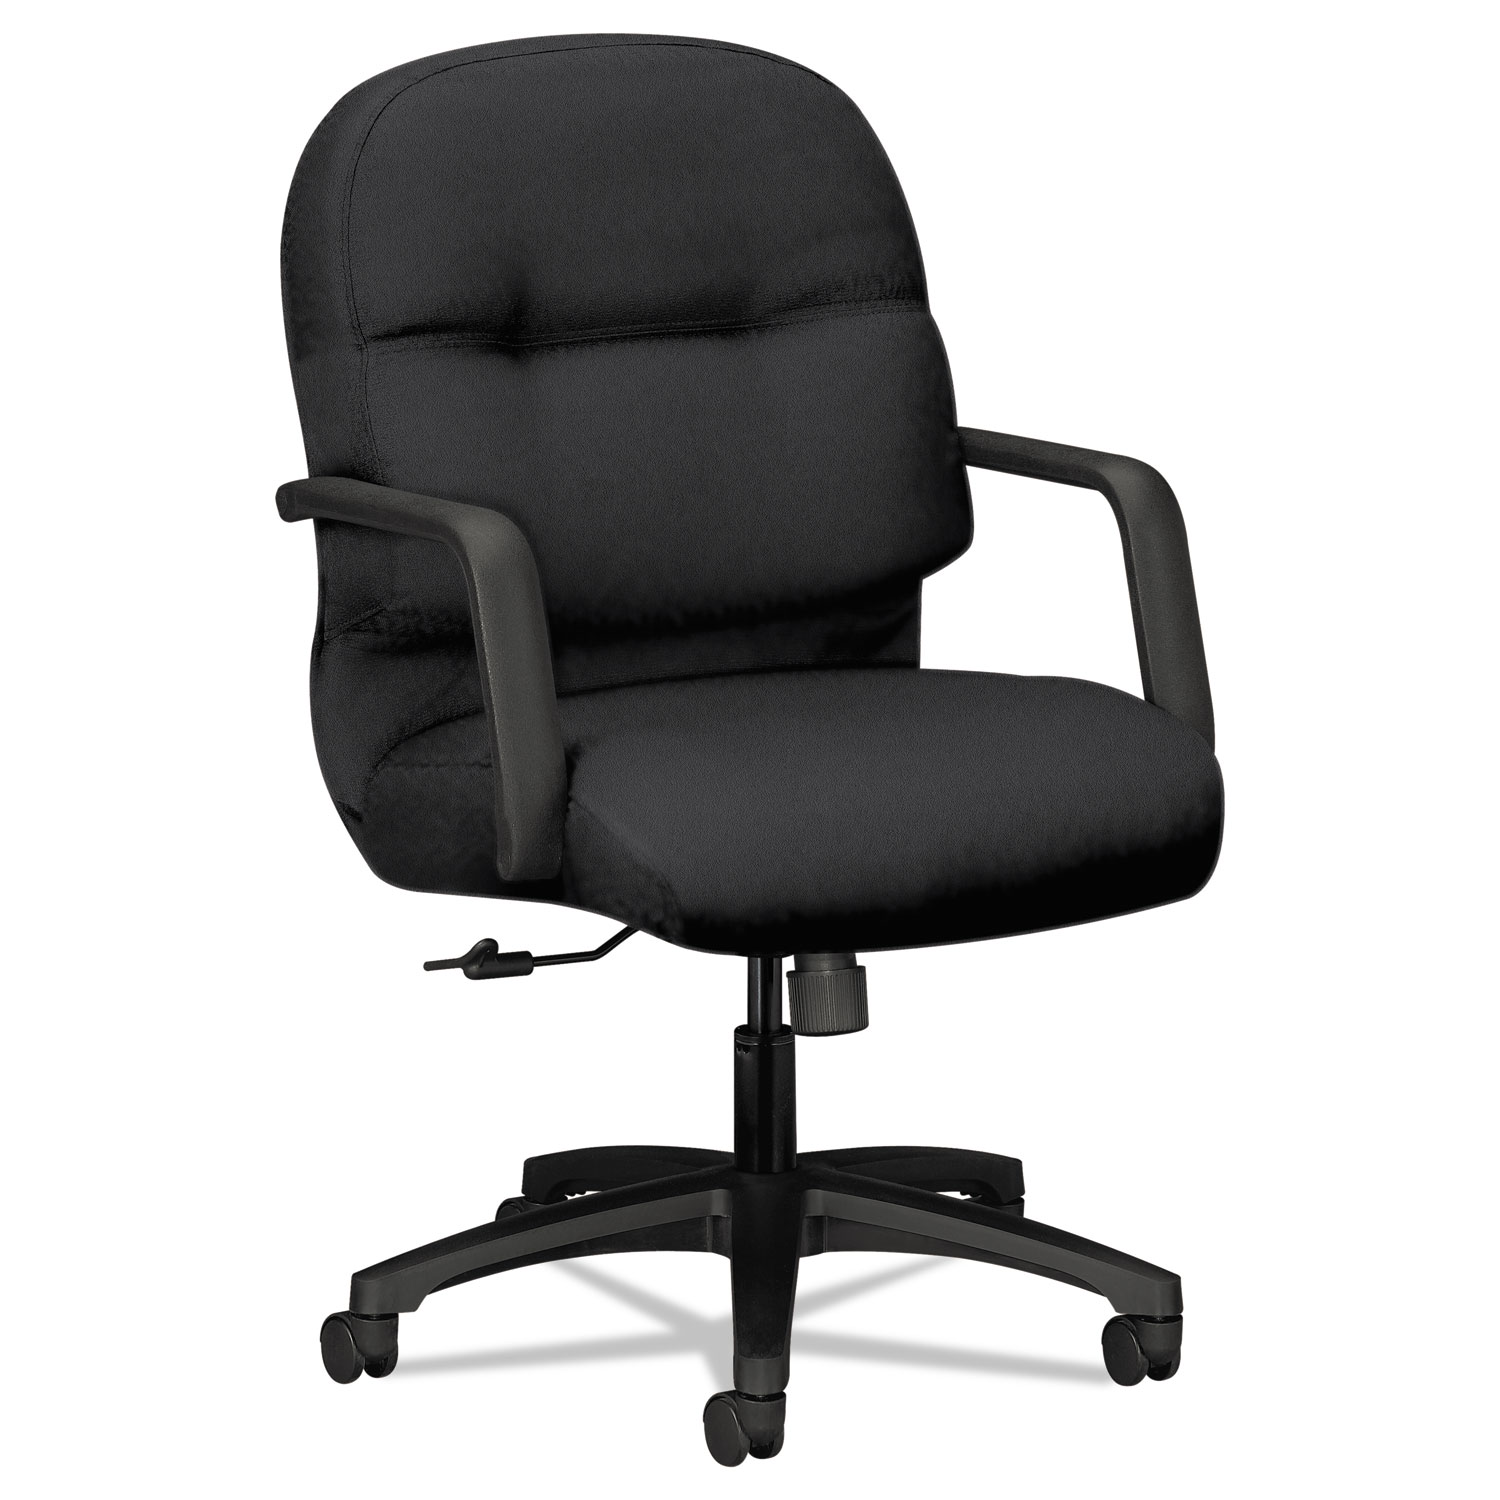  HON H2092.H.CU10.T Pillow-Soft 2090 Series Managerial Mid-Back Swivel/Tilt Chair, Supports up to 300 lbs., Black Seat/Black Back, Black Base (HON2092CU10T) 